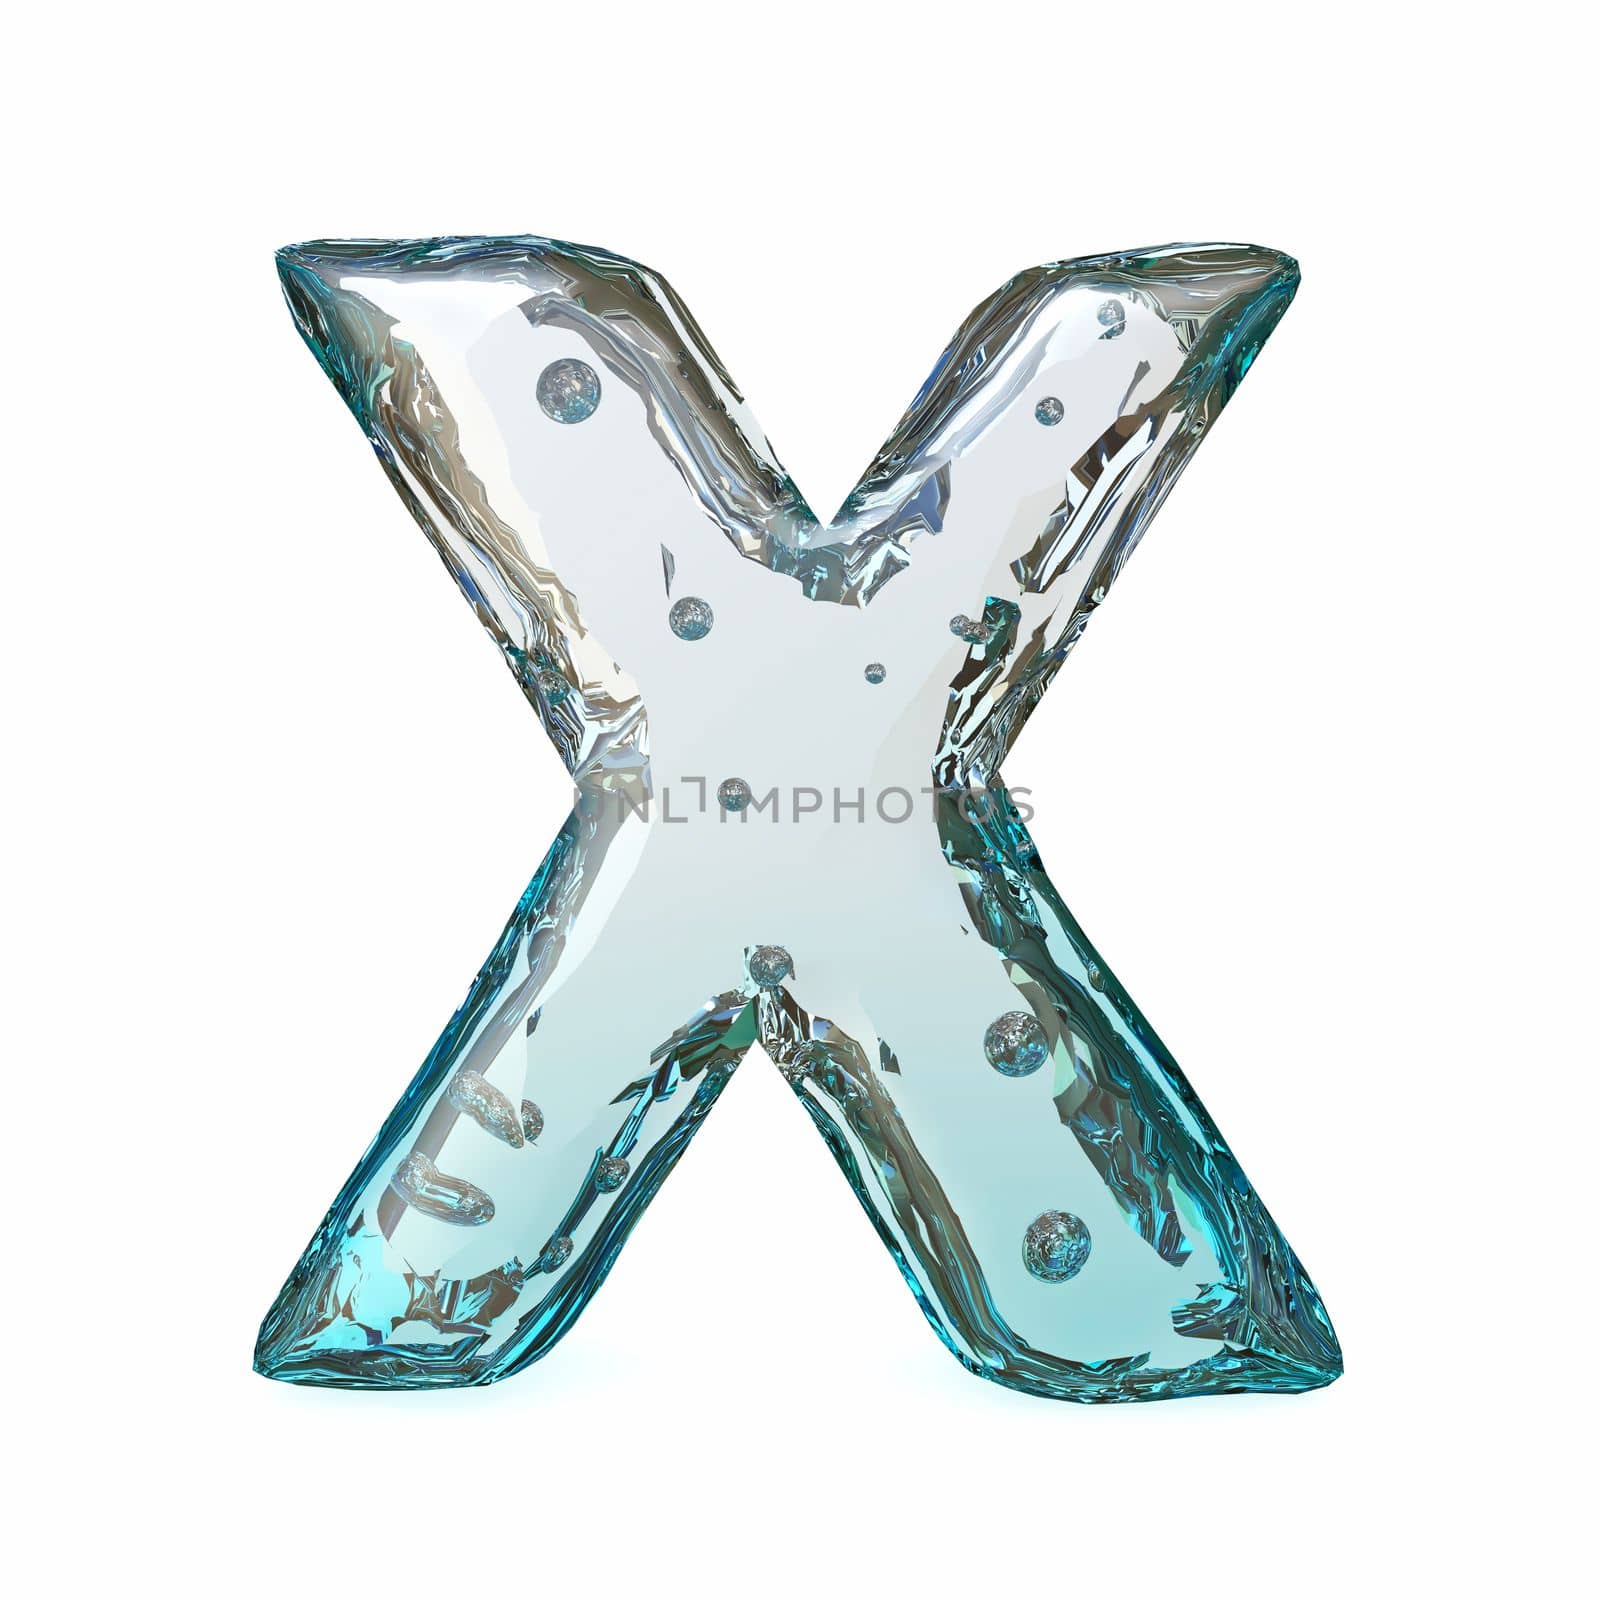 Blue ice font Letter X 3D rendering illustration isolated on white background